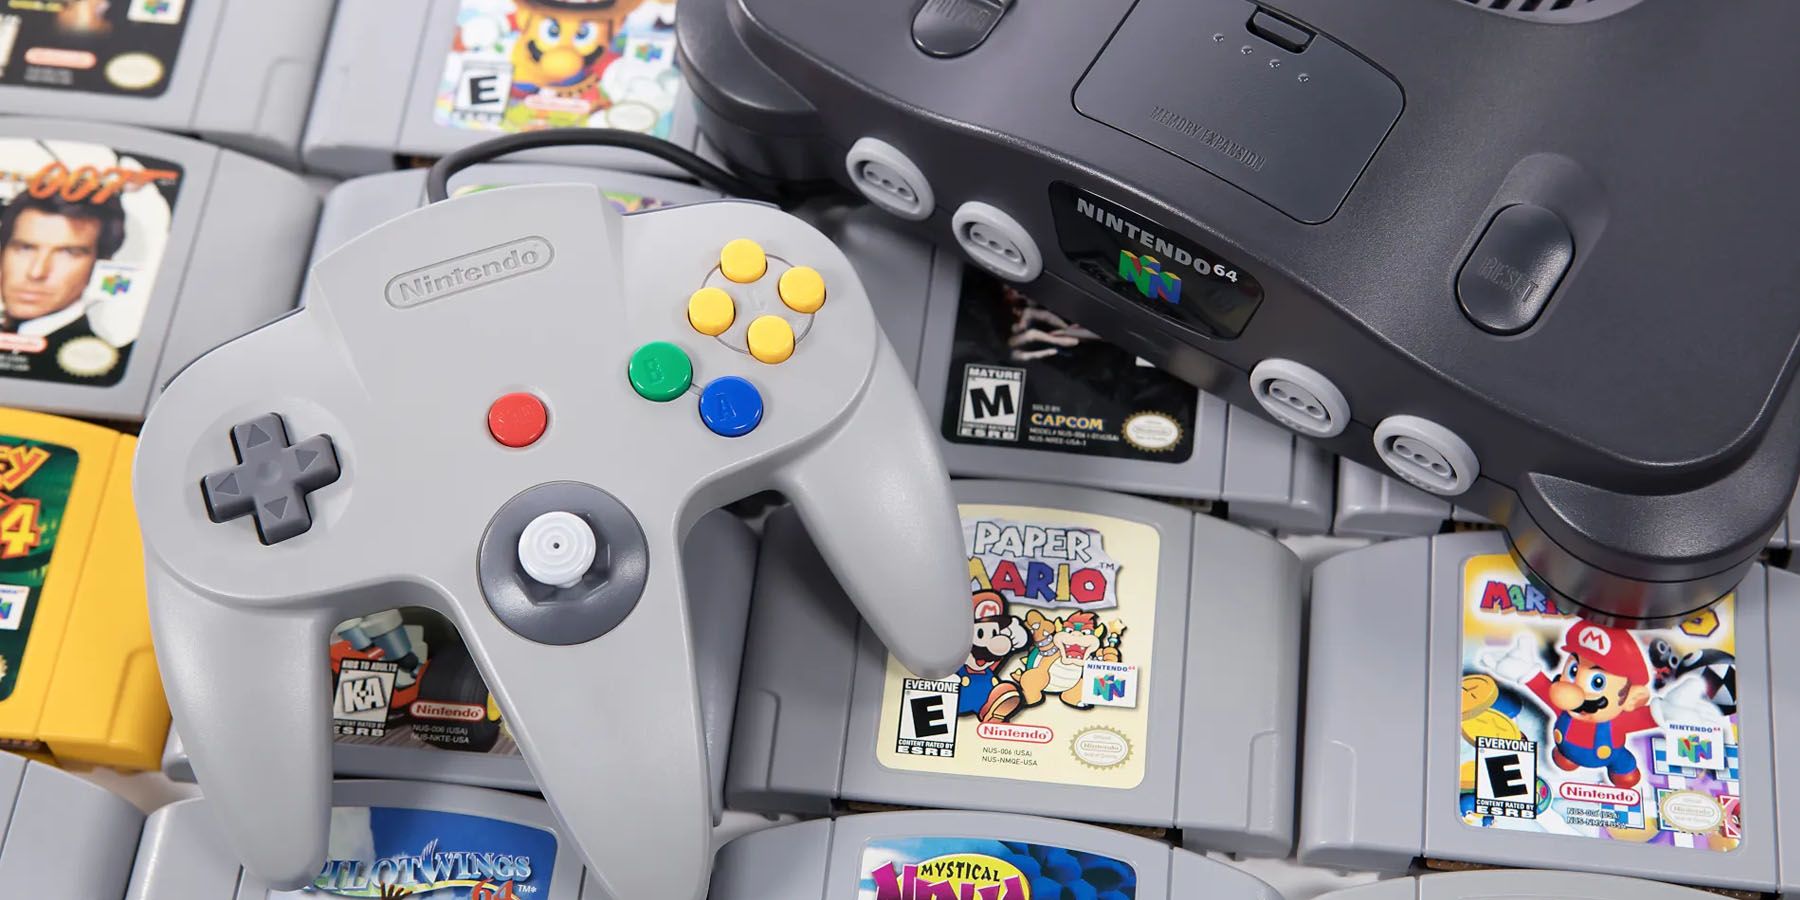 An image of a Nintendo 64 console, controller, and several game cartridges.